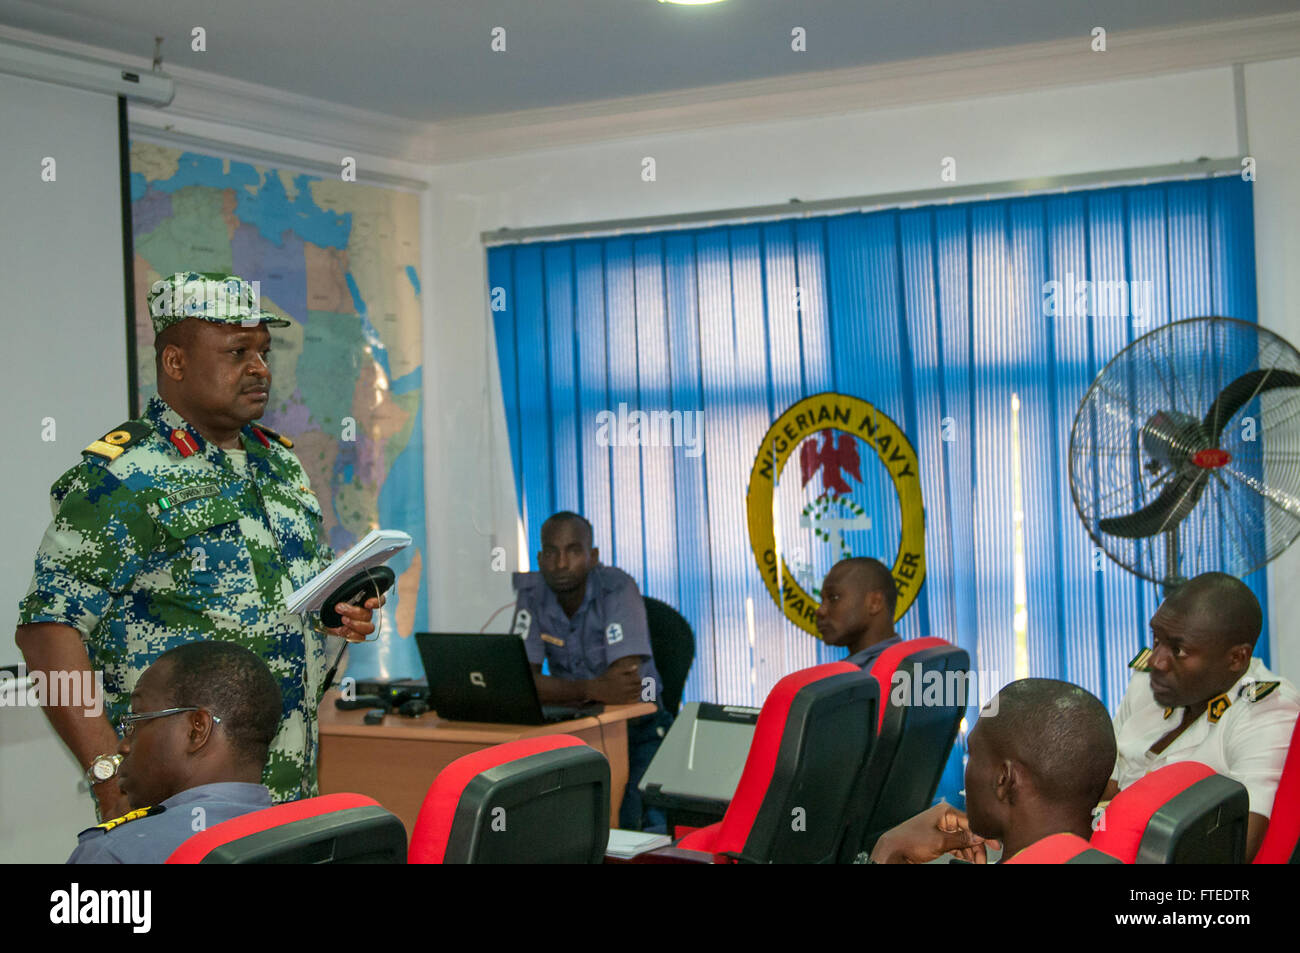 140420-N-ZE250-017 LAGOS, Nigeria (April 20, 2014) - Nigerian navy Commodore AK Owhor-chuku, national multi-force commander of Obangame Express 2014, briefs African military personnel about the upcoming events at the exercise headquarters, Nigerian Western Naval Command. Obangame Express is a U.S. Africa Command-sponsored multinational maritime exercise designed to increase maritime safety and security in the Gulf of Guinea.  (U.S. Navy Photo by Mass Communication Specialist Weston Jones/Released)  Join the conversation on <a href='https://twitter.com/naveur navaf' rel='nofollow'>Twitter</a> f Stock Photo